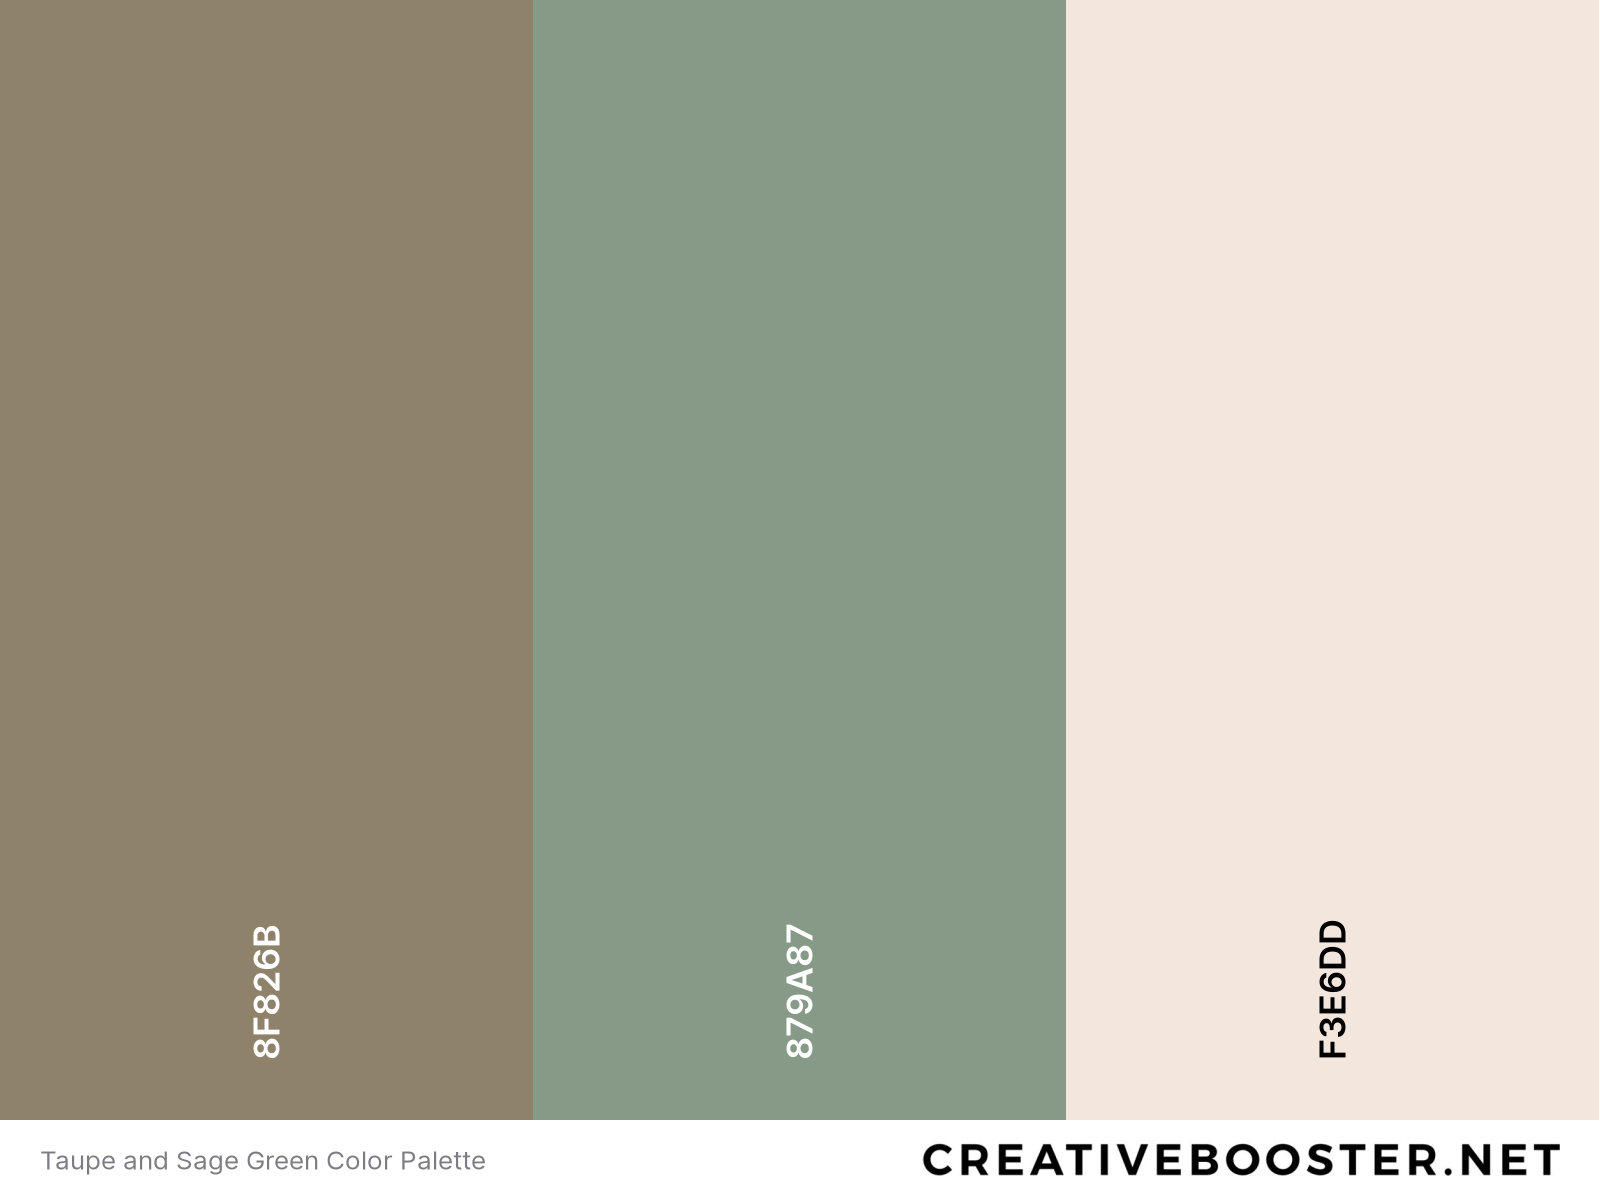 Taupe and Sage Green Color Palette